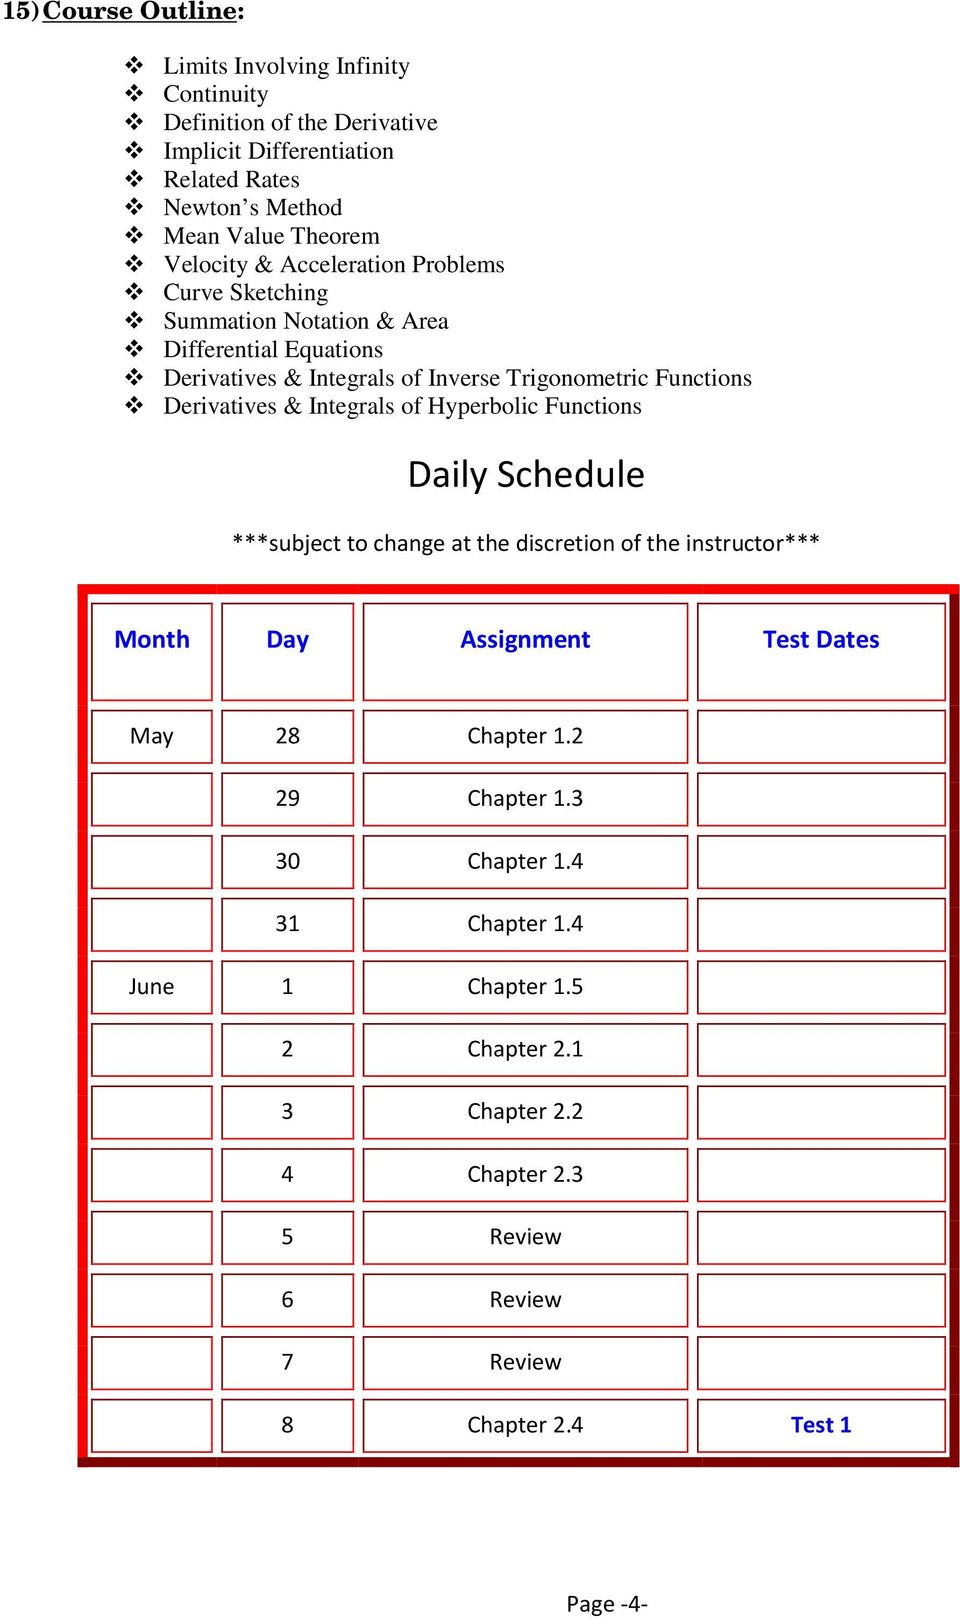 Derivatives & Integrals of Hyperbolic Functions Daily Schedule ***subject to change at the discretion of the instructor*** Month Day Assignment Test Dates May 28